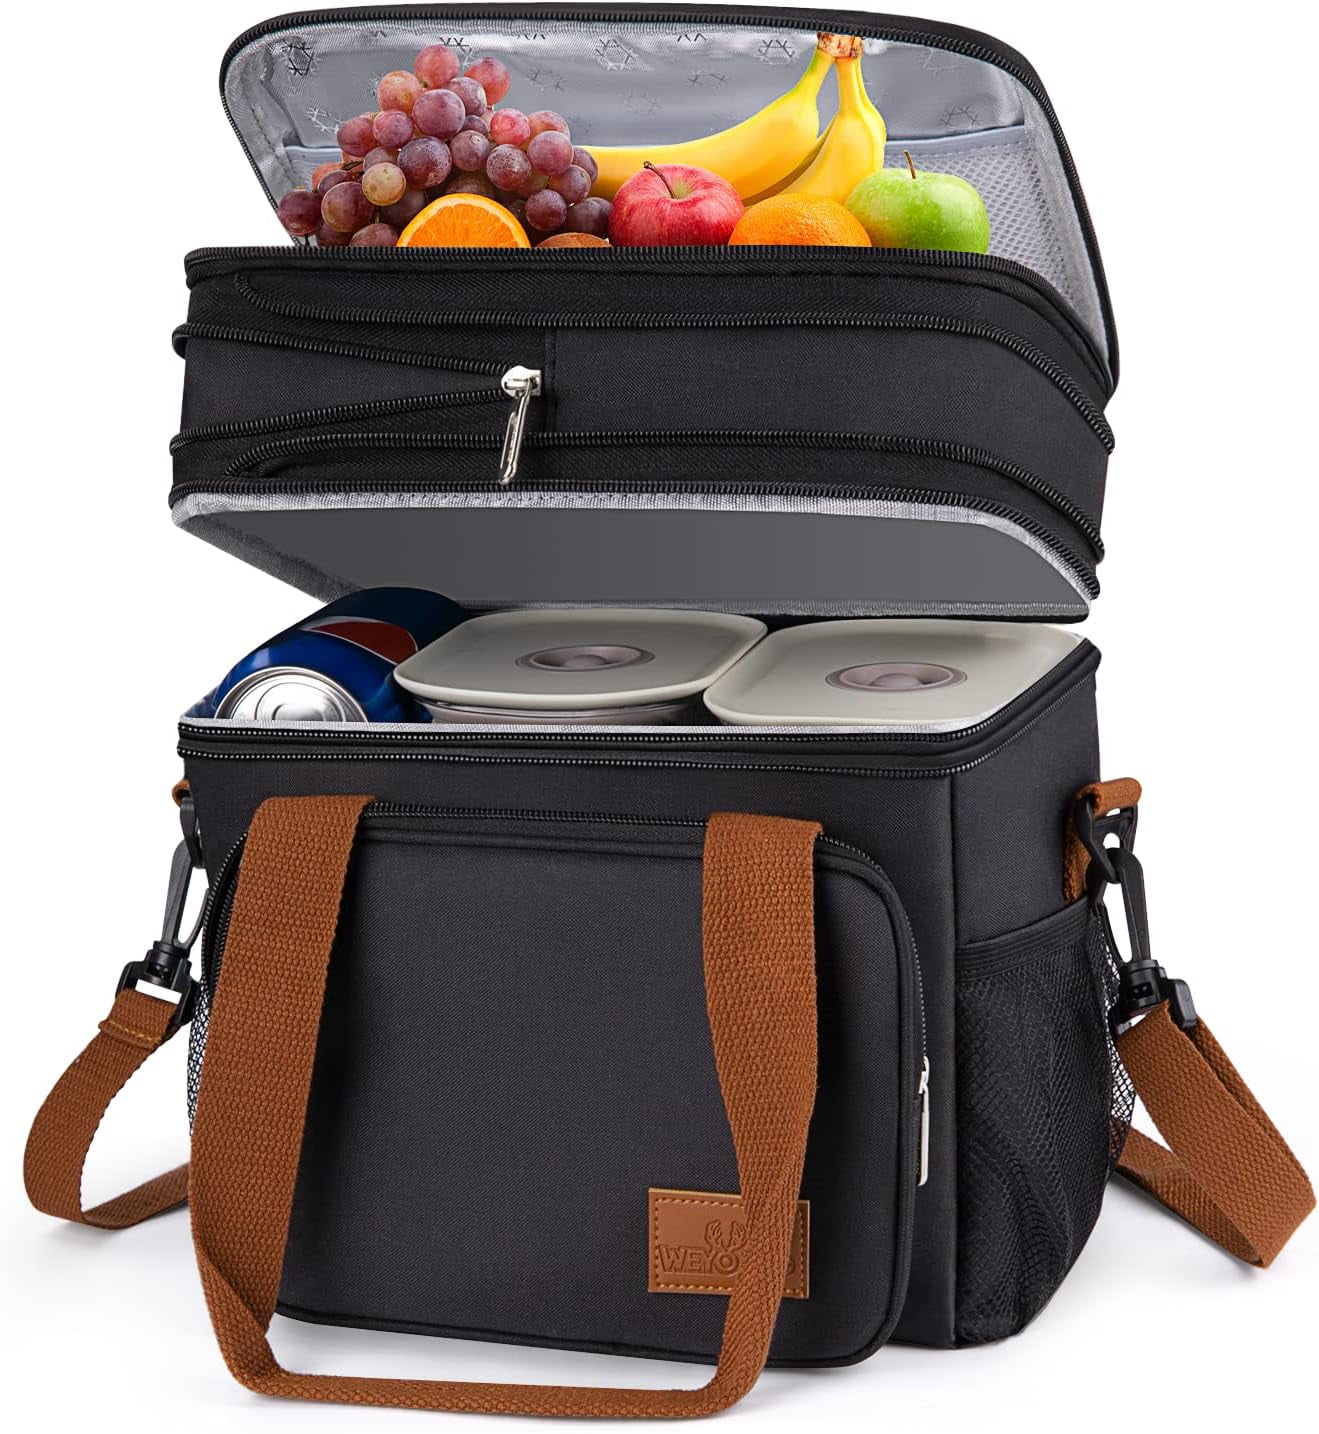 IZEYNO Lunch Box for Men Women, Expandable Double Deck Lunch Cooler Bag ...